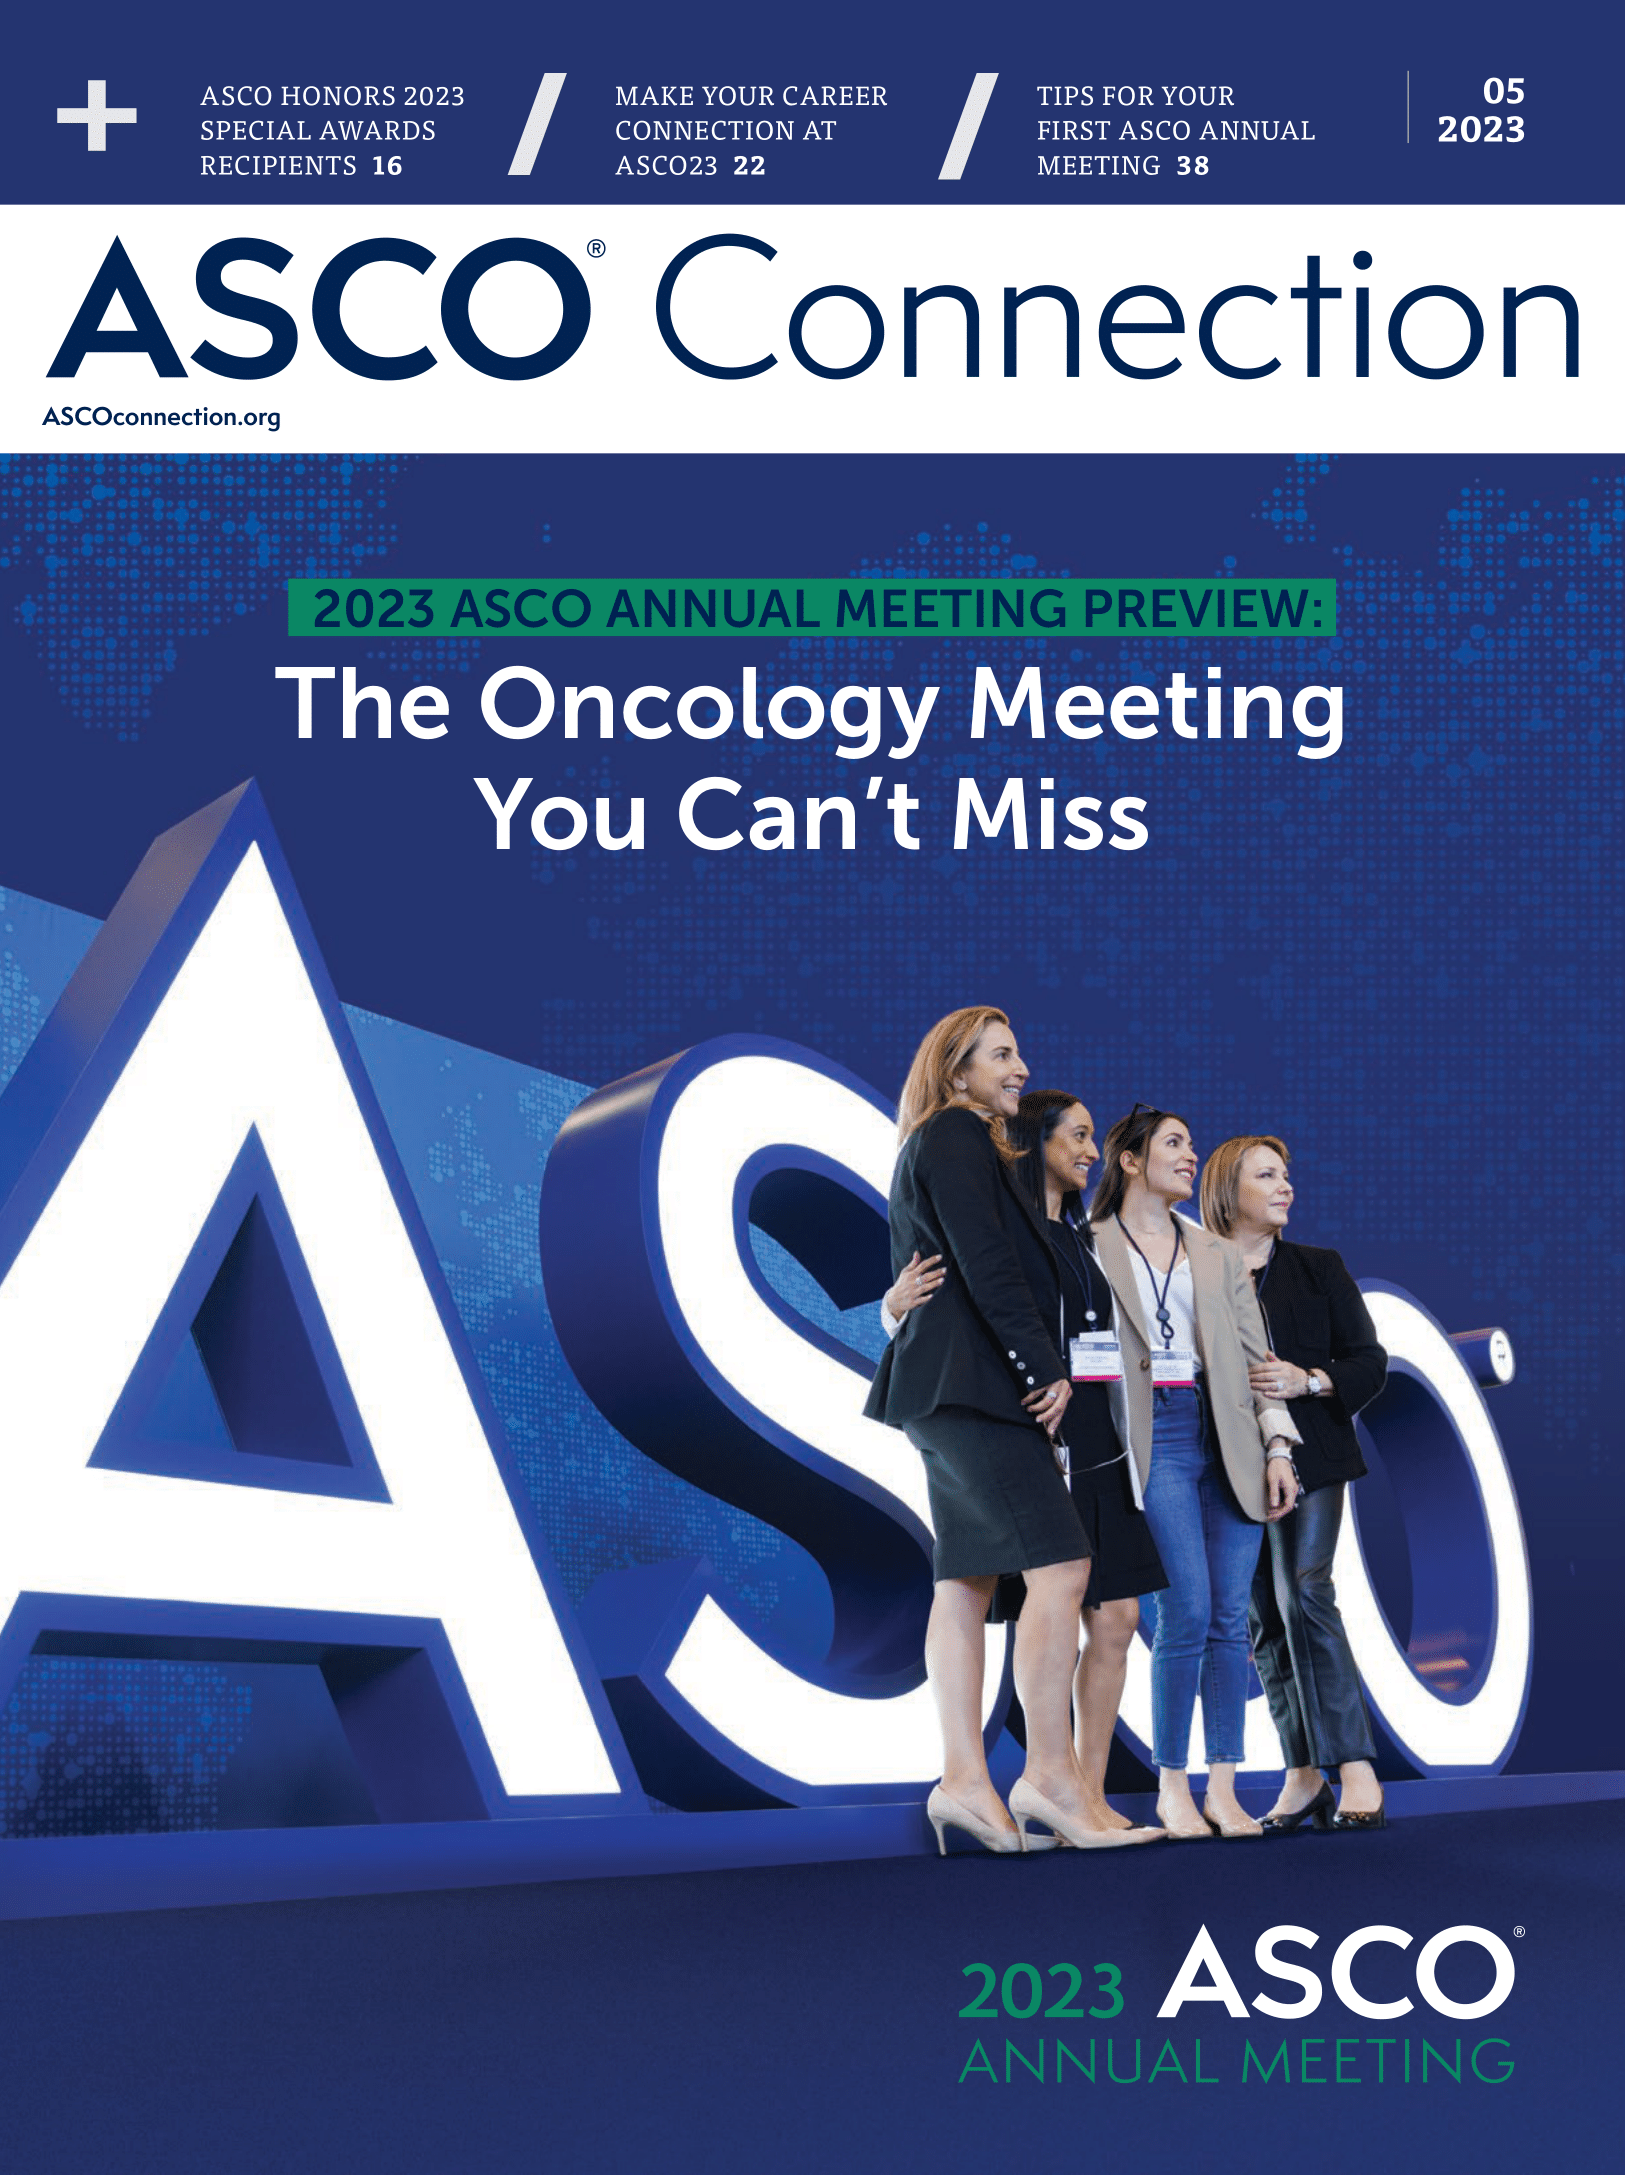 Top Features ASCO Connection